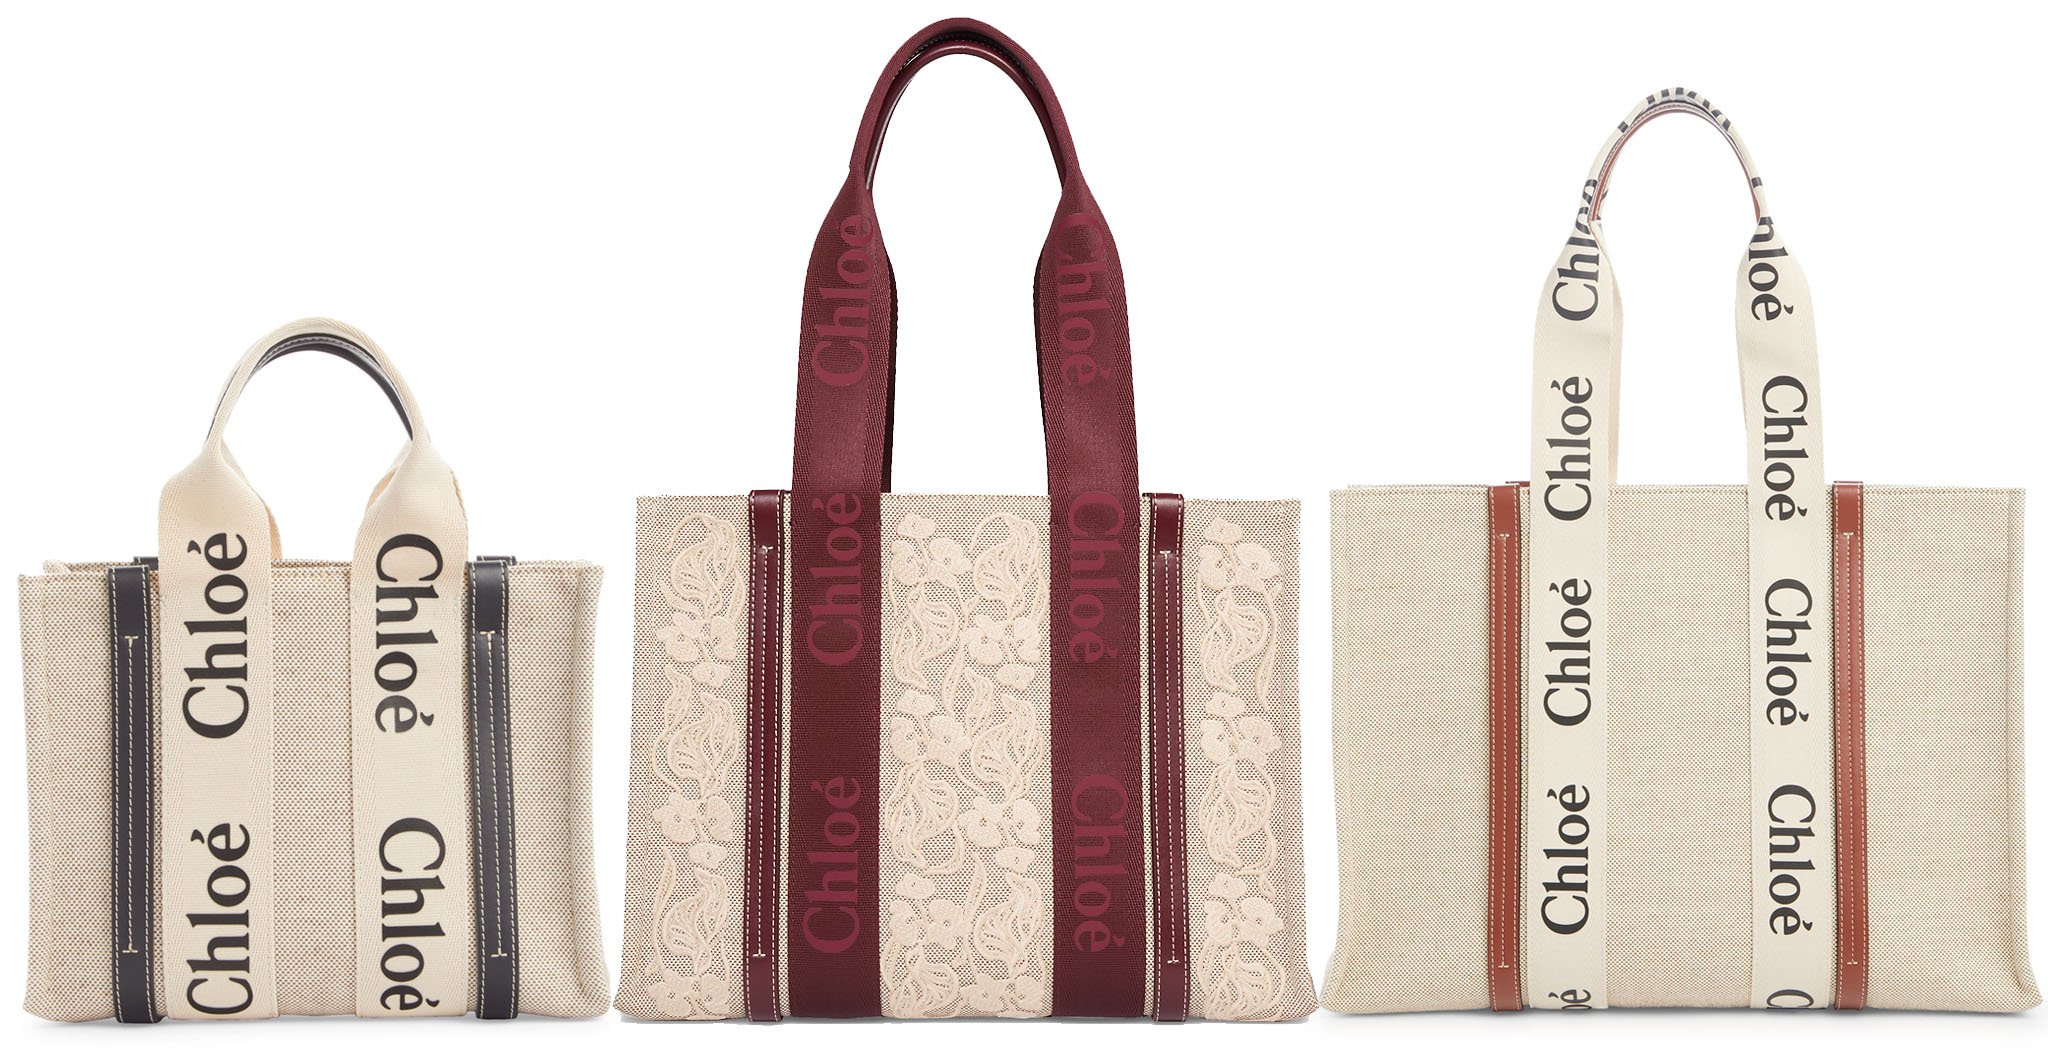 Chloe's Woody tote is a practical yet trendy bag made of neutral canvas with leather trims 